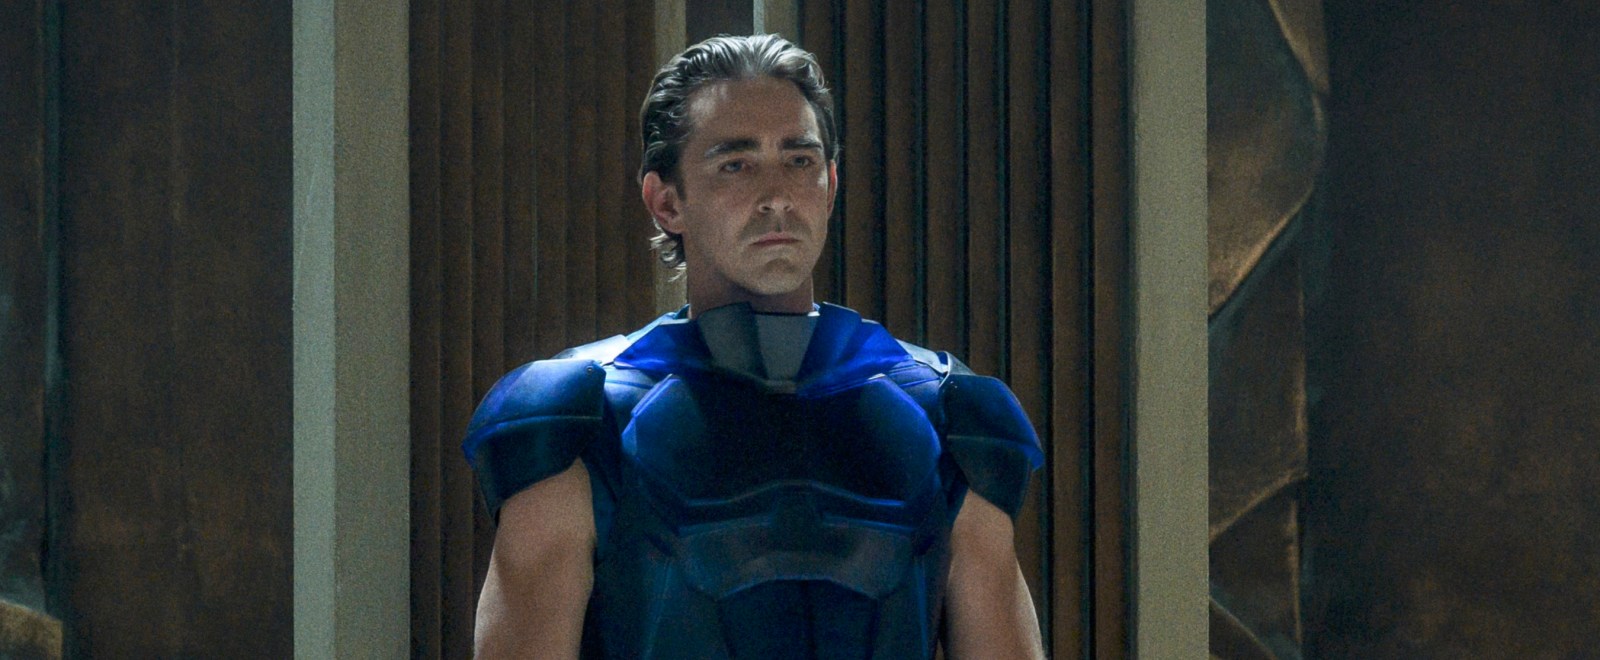 lee-pace-foundation.jpg